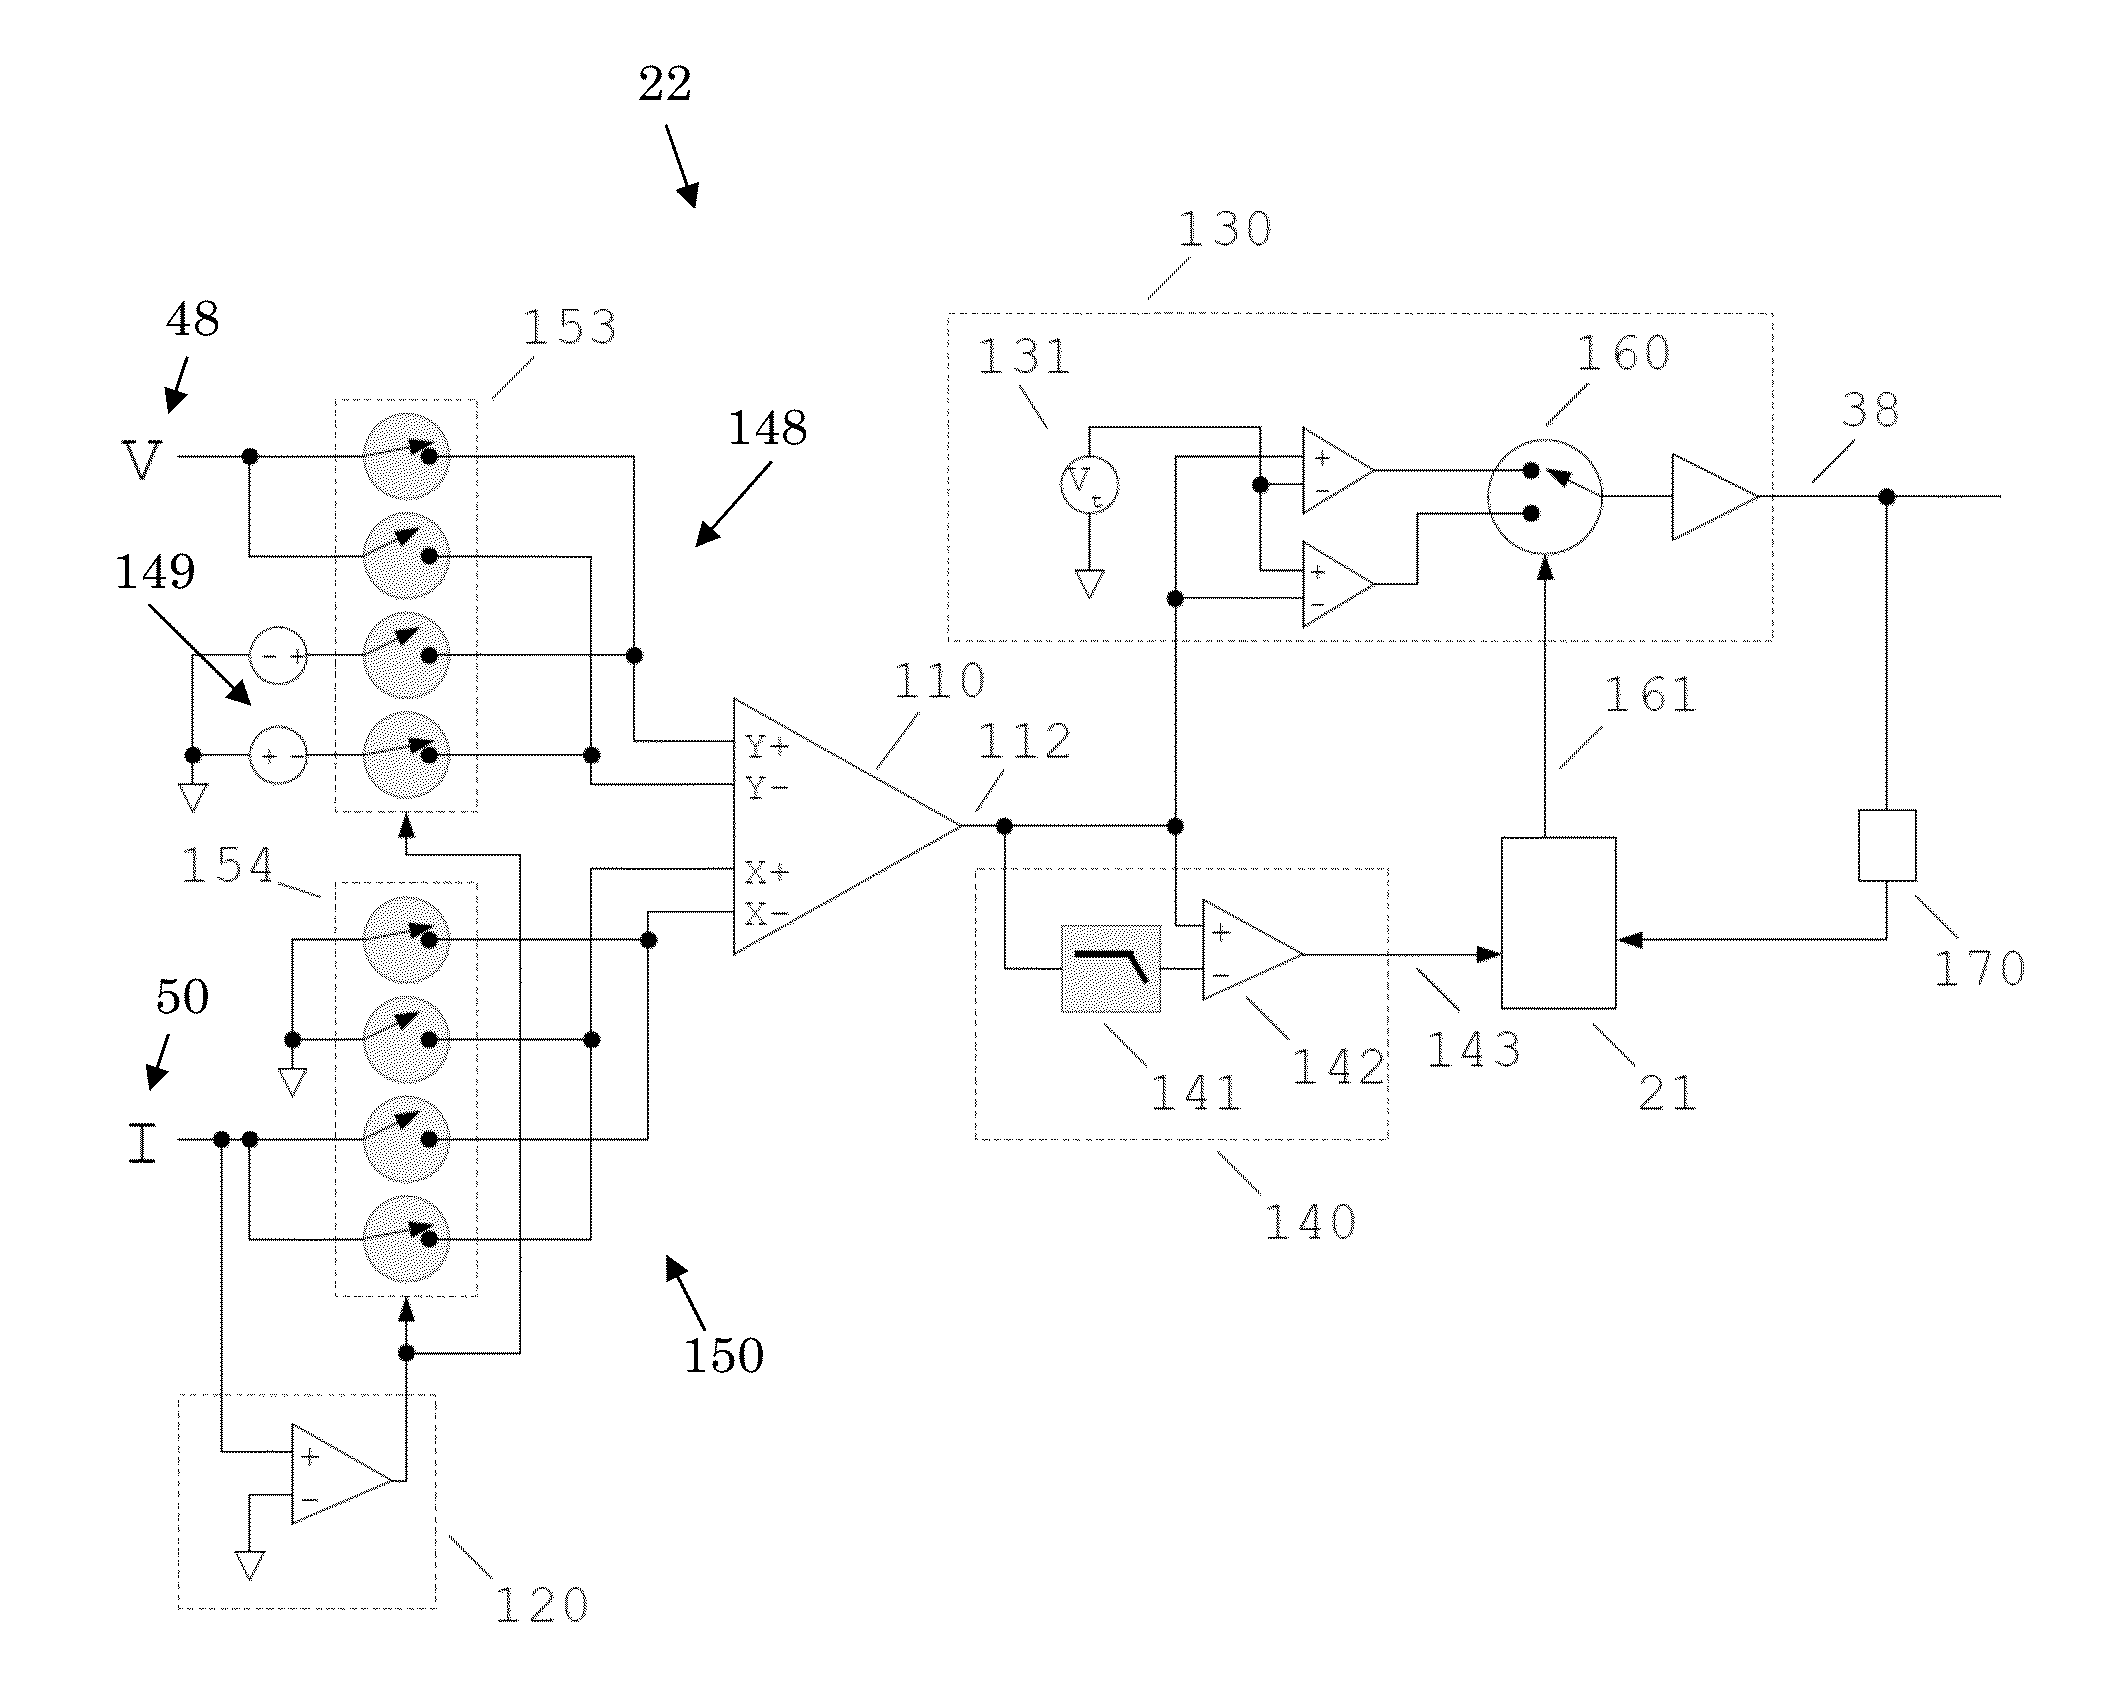 Power envelope controller and method